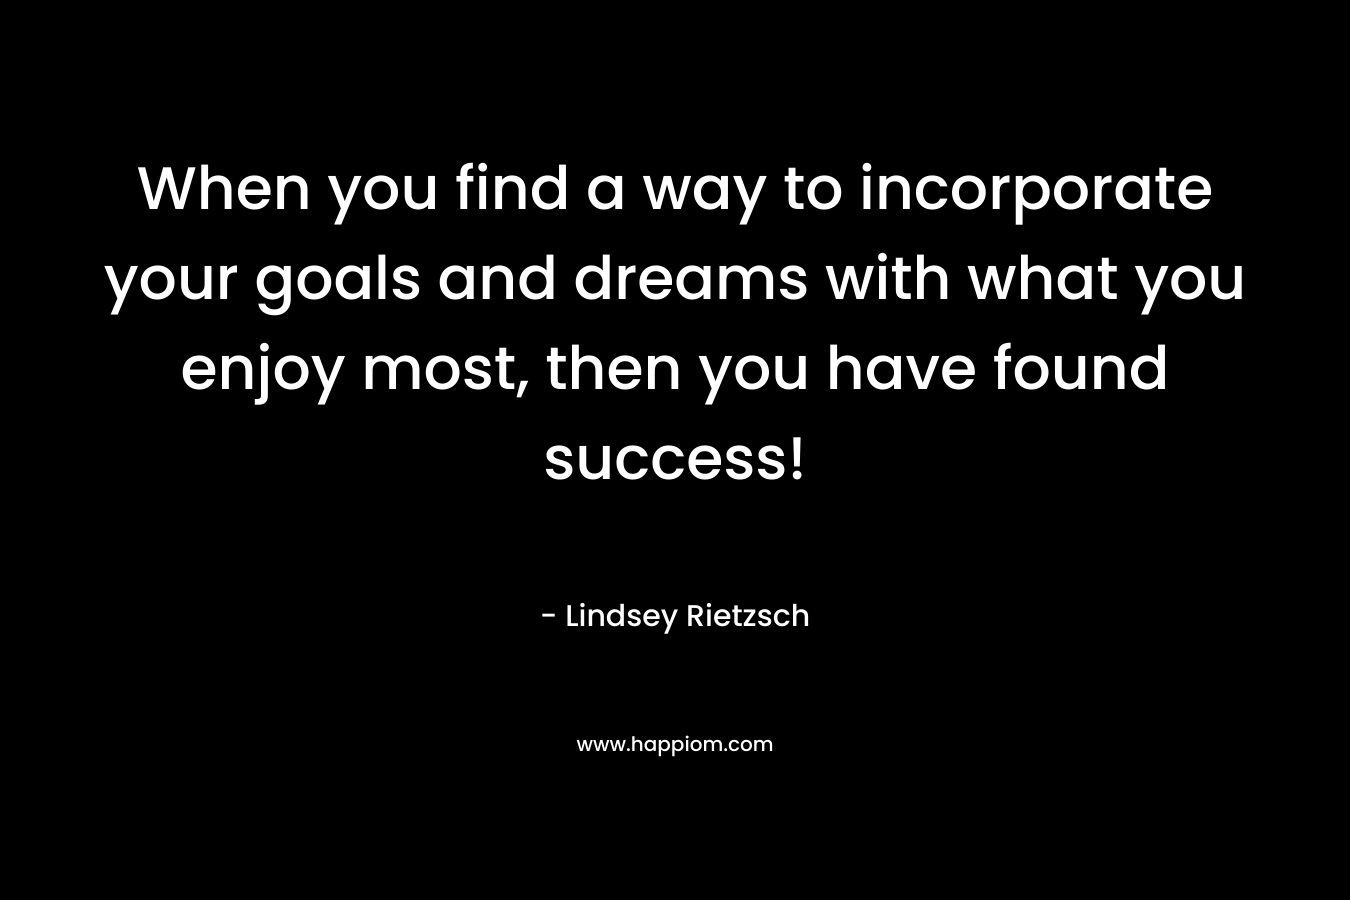 When you find a way to incorporate your goals and dreams with what you enjoy most, then you have found success!